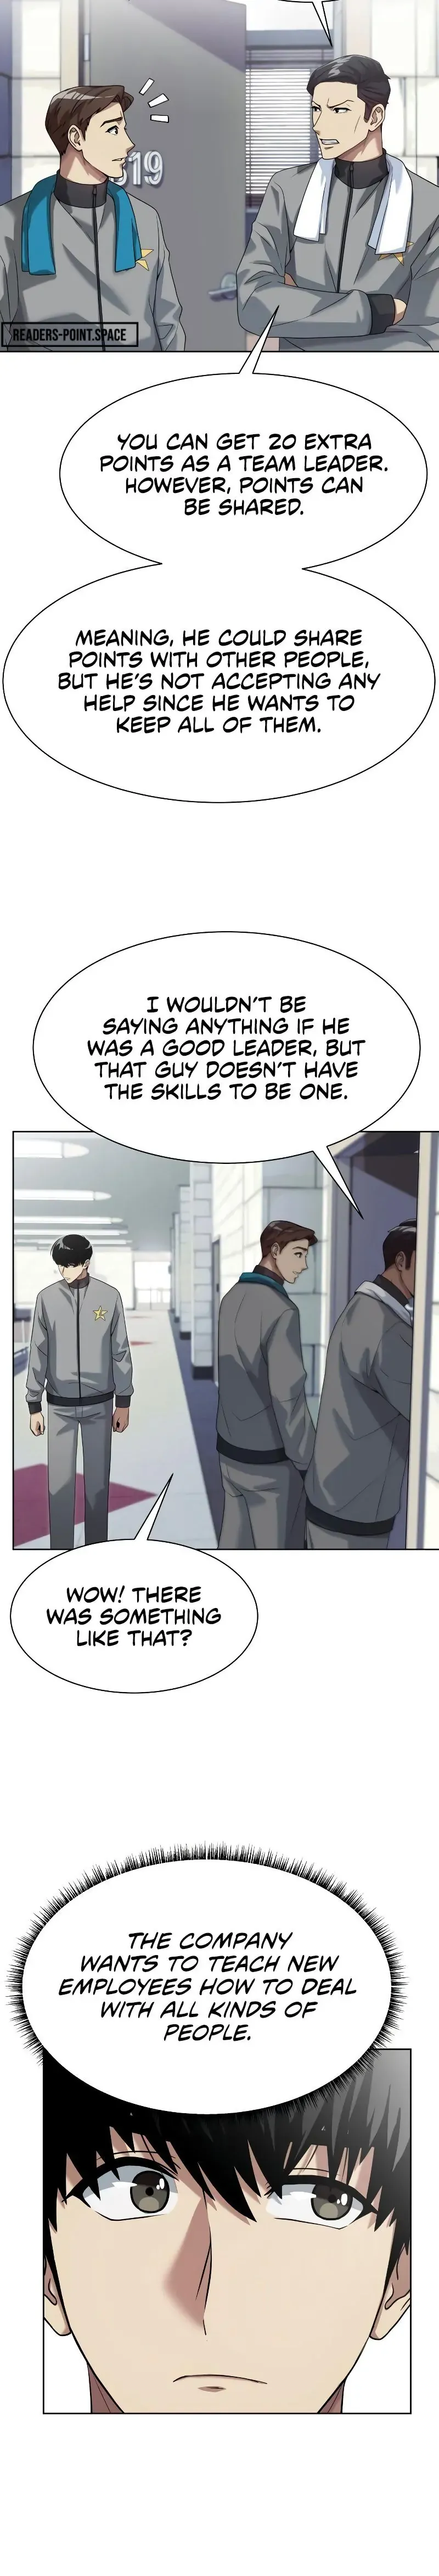 Becoming A Legendary Ace Employee Chapter 11 page 28